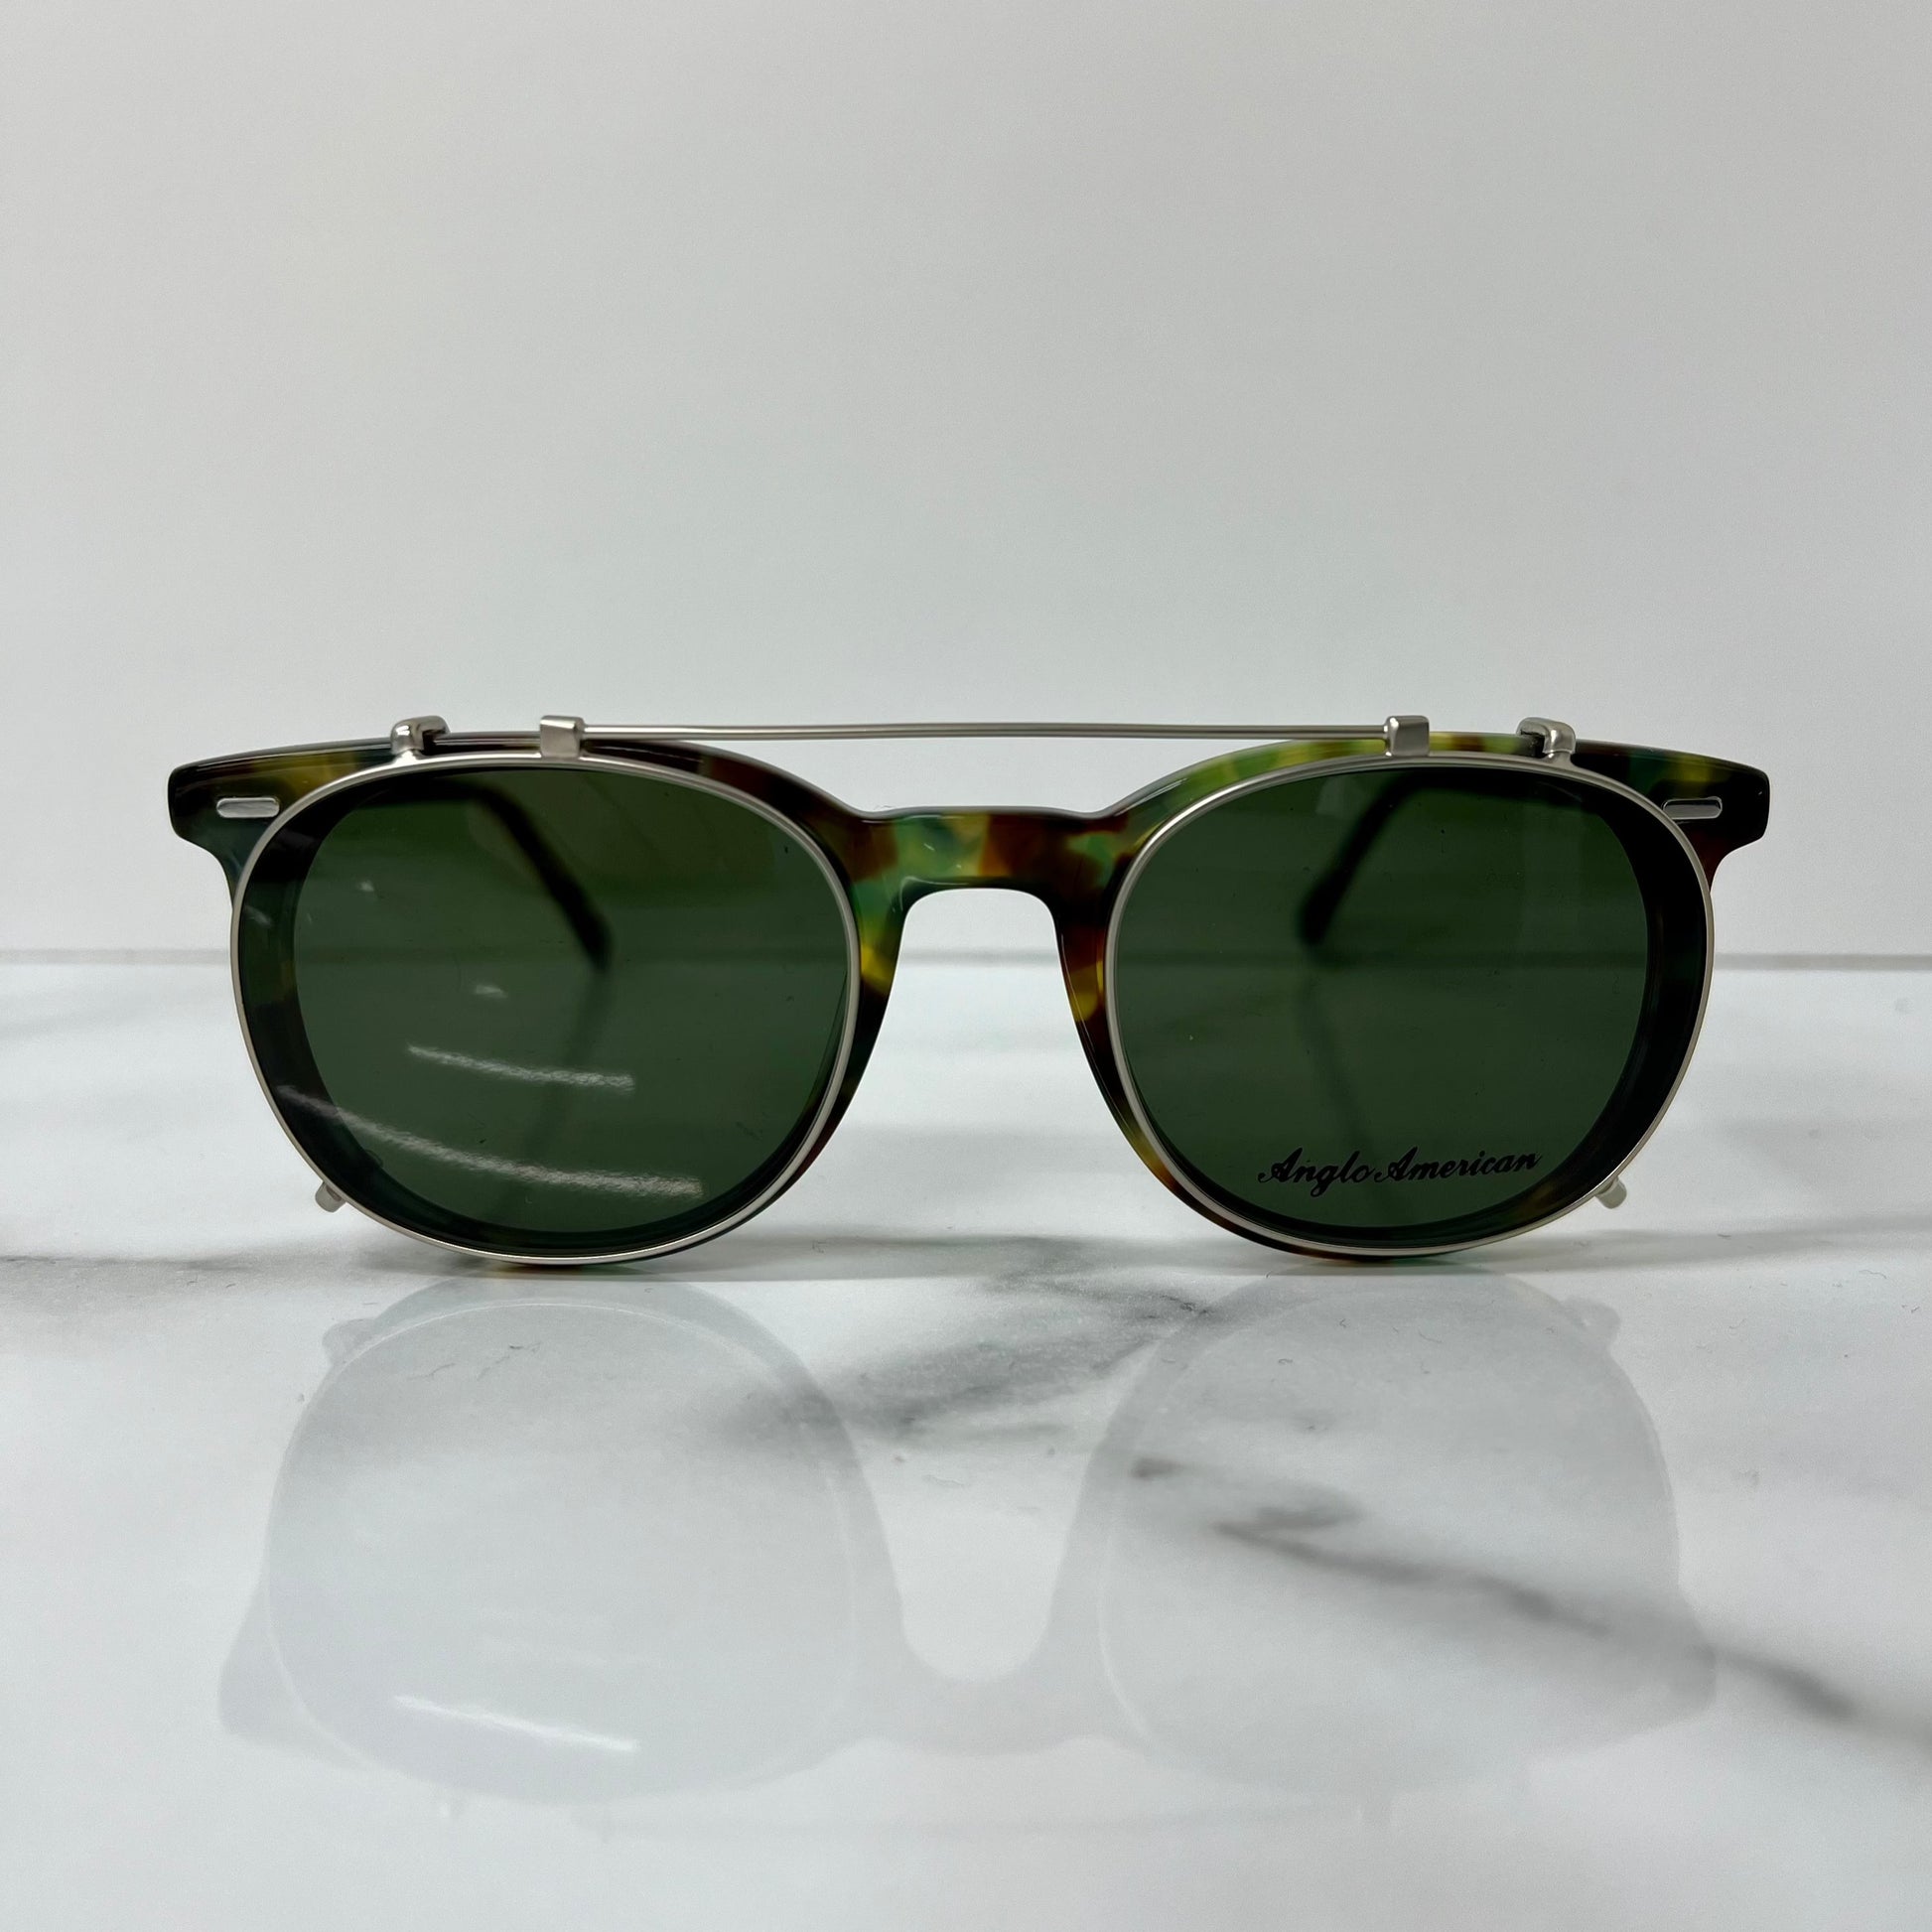 Anglo American Clip on Sunglasses 313 HYBG Green Camouflage Optical Glasses